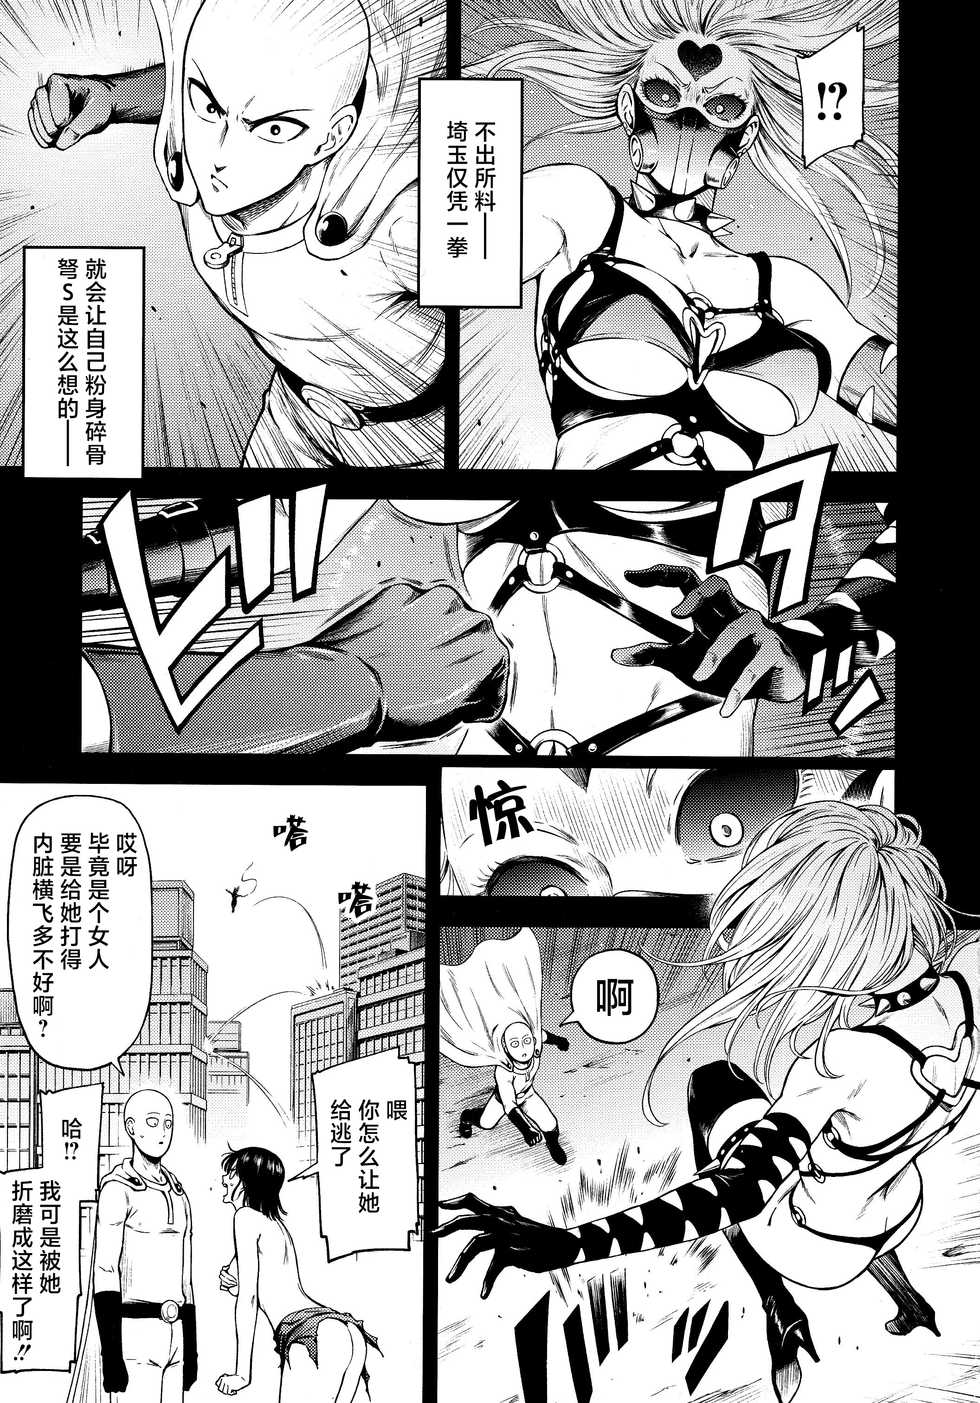 [Kiyosumi Hurricane (Kiyosumi Hurricane)] ONE-HURRICANE 8 (One Punch Man) [chinese] [慕枫汉化] - Page 2